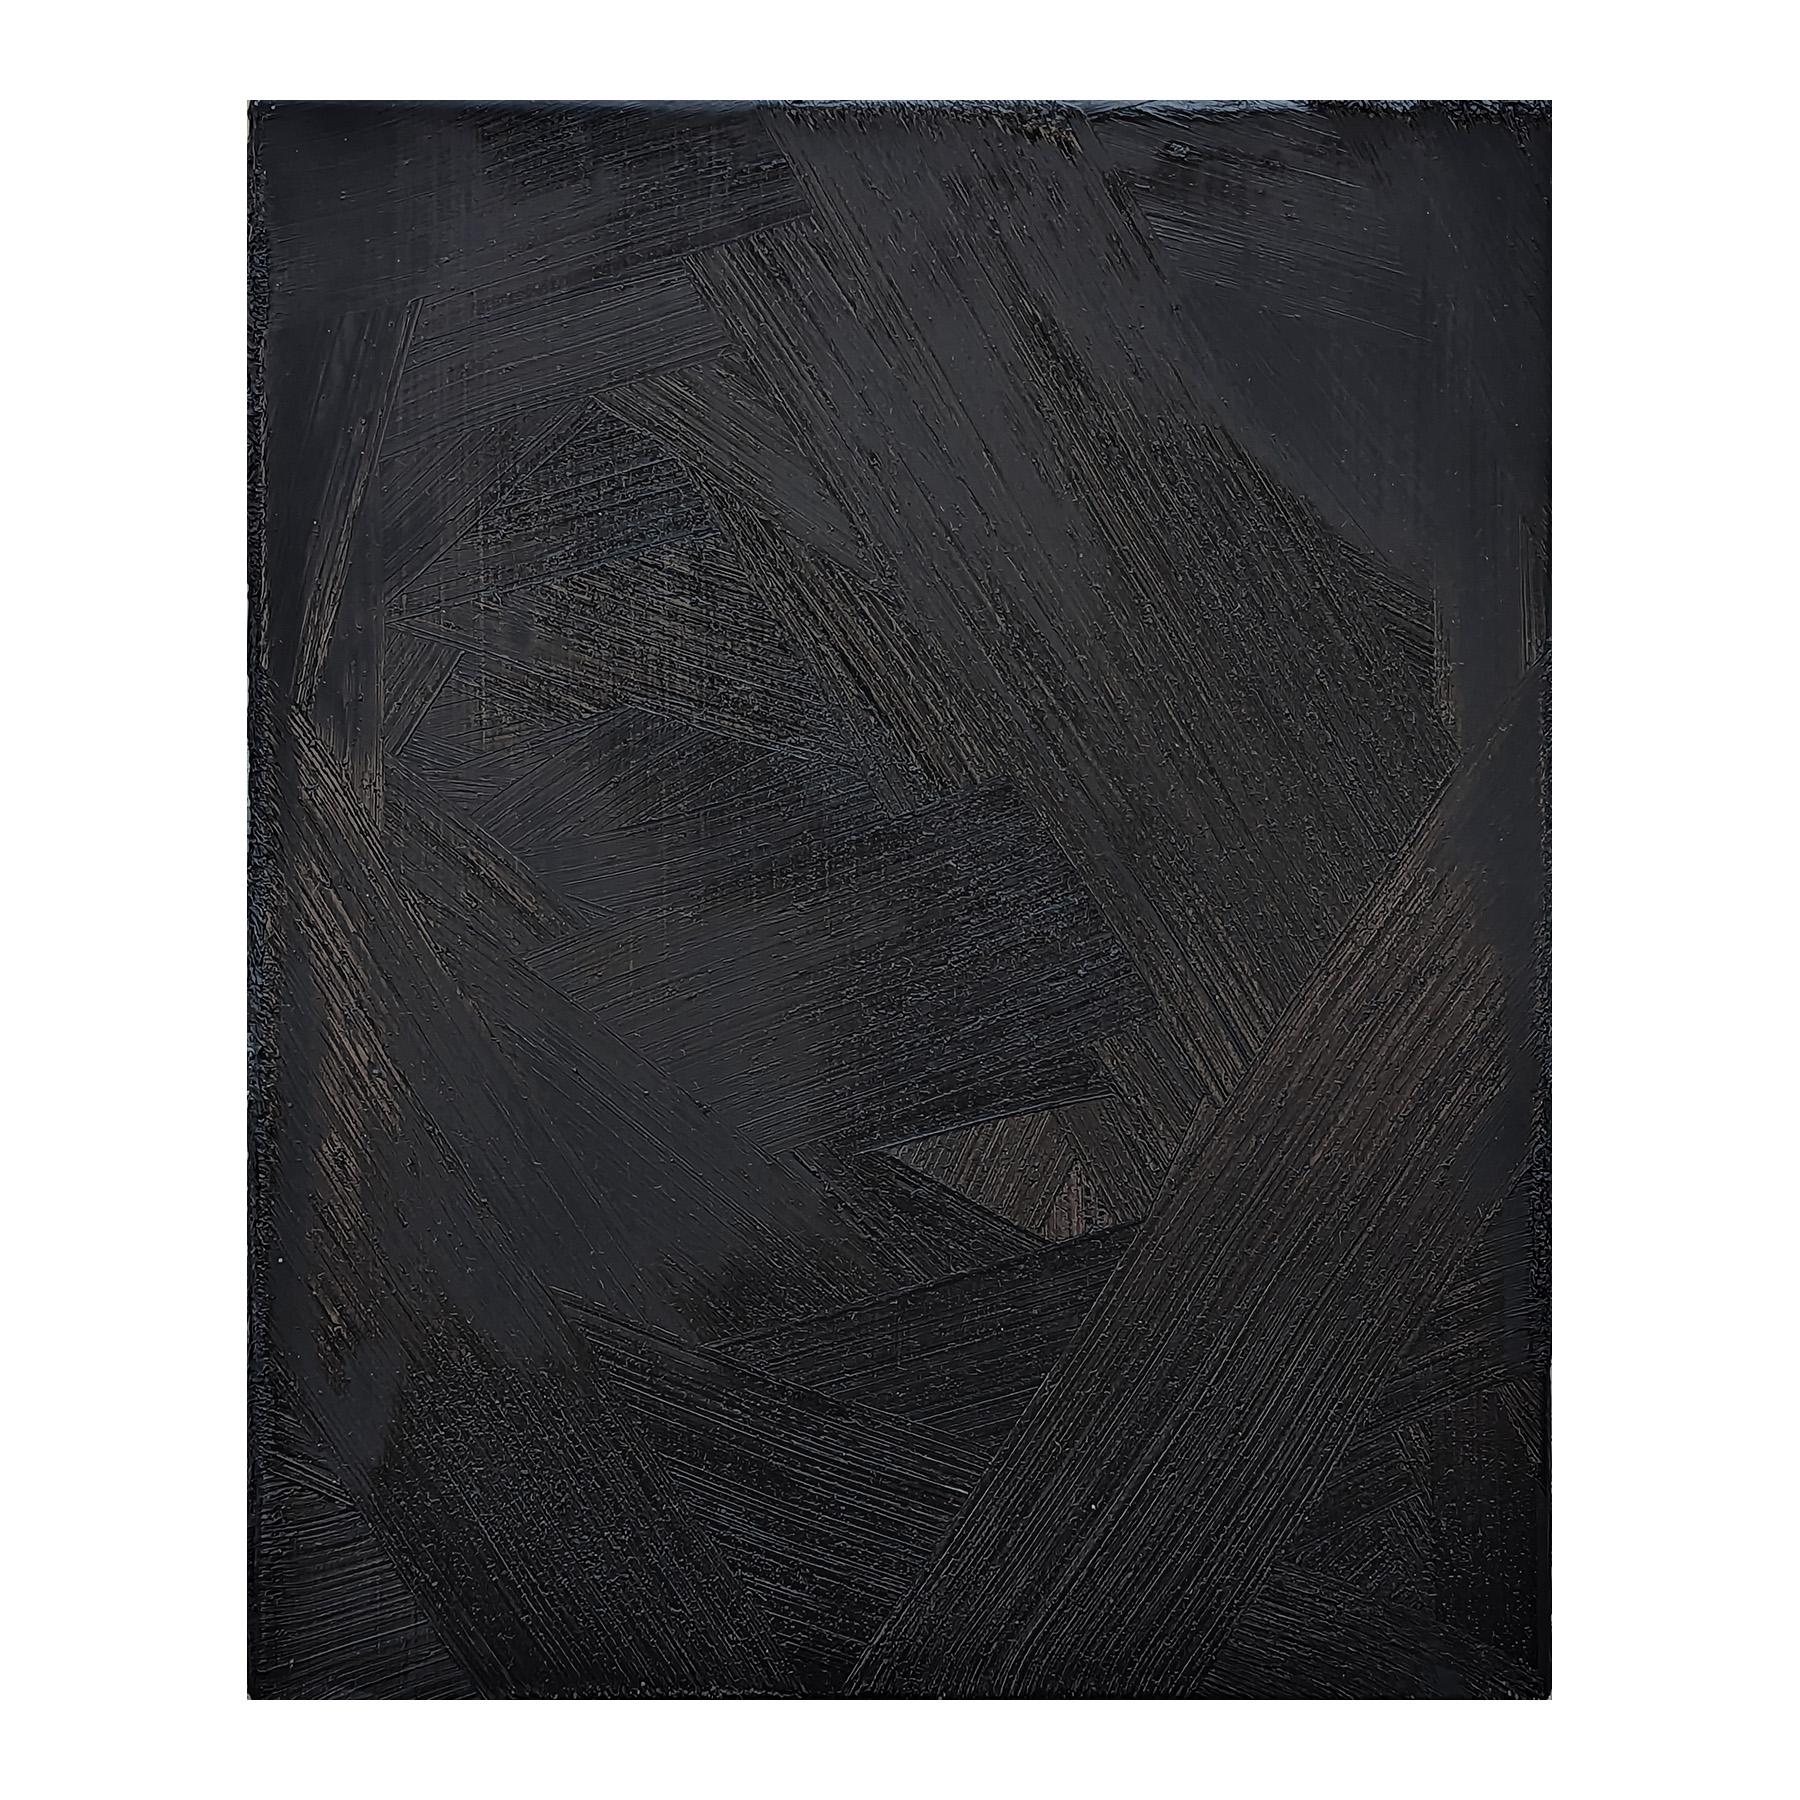 Void (BDSM) Contemporary Black Textured Impasto Abstract Painting  im Angebot 1